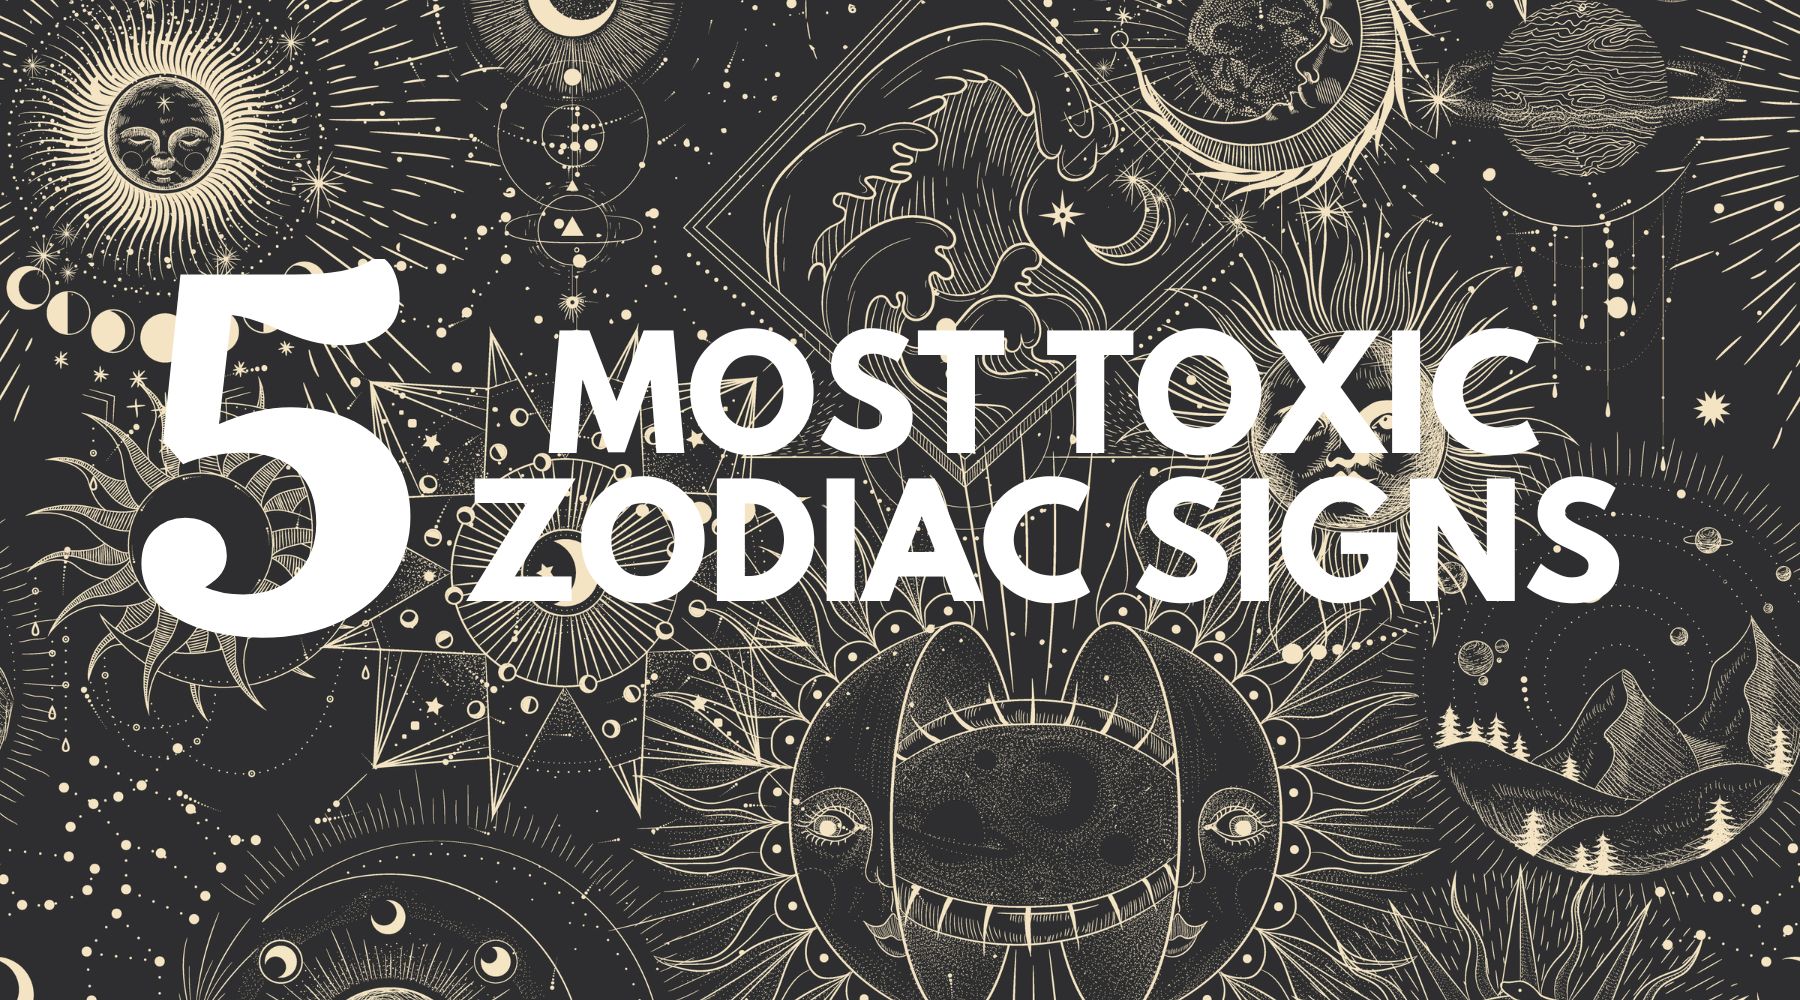 The 5 most toxic zodiac signs